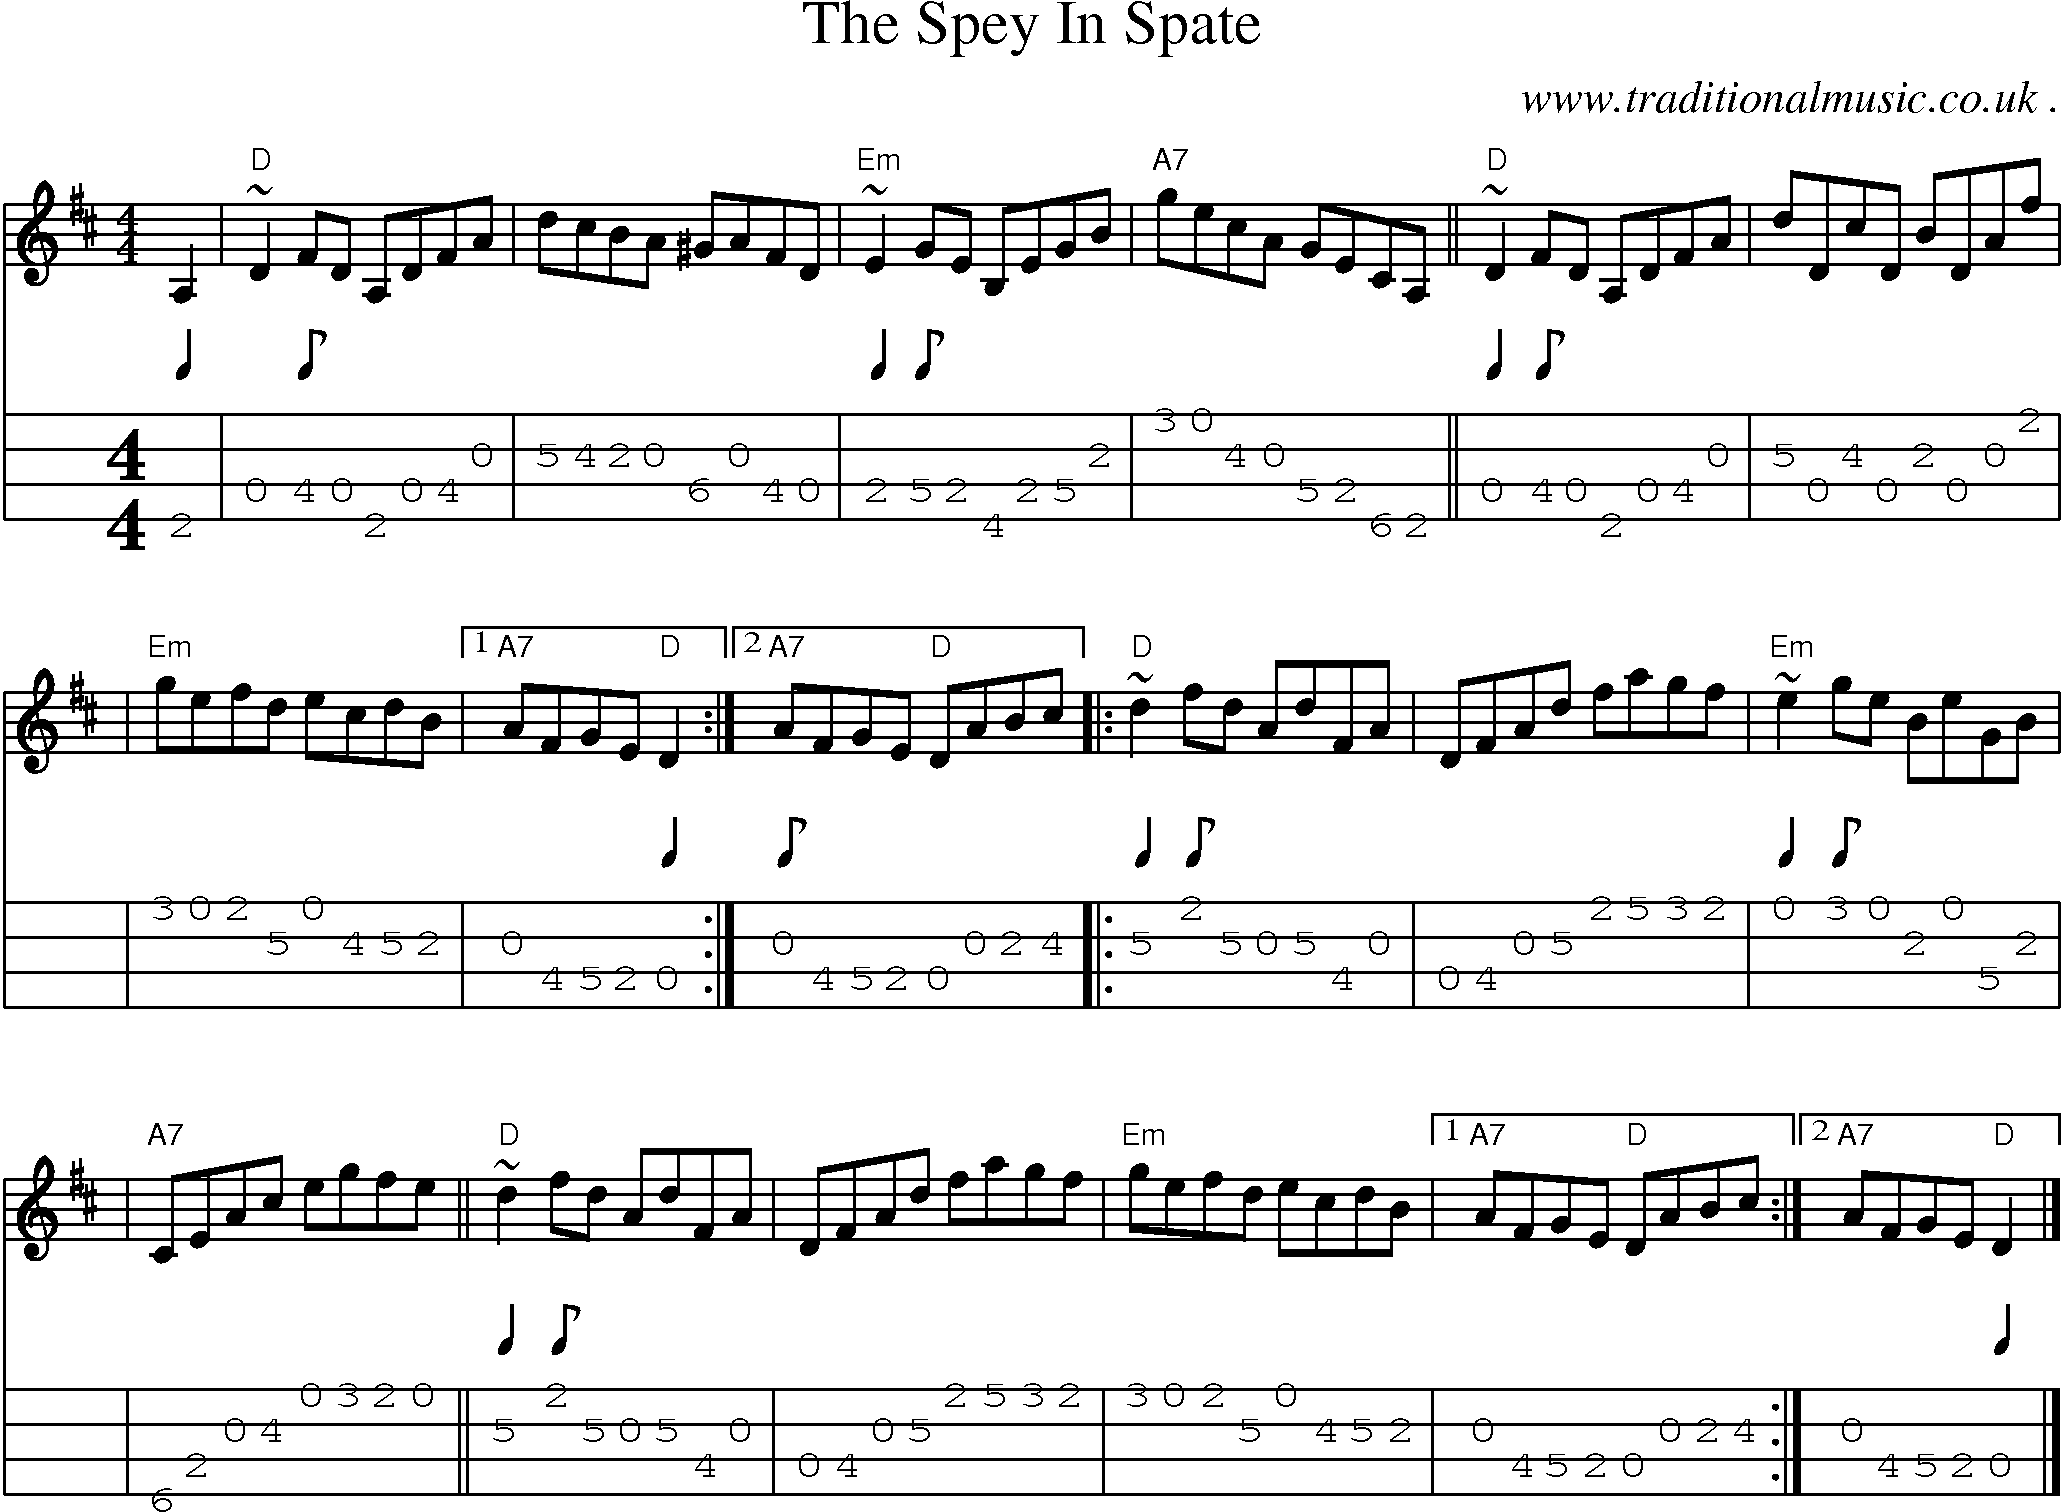 Sheet-music  score, Chords and Mandolin Tabs for The Spey In Spate